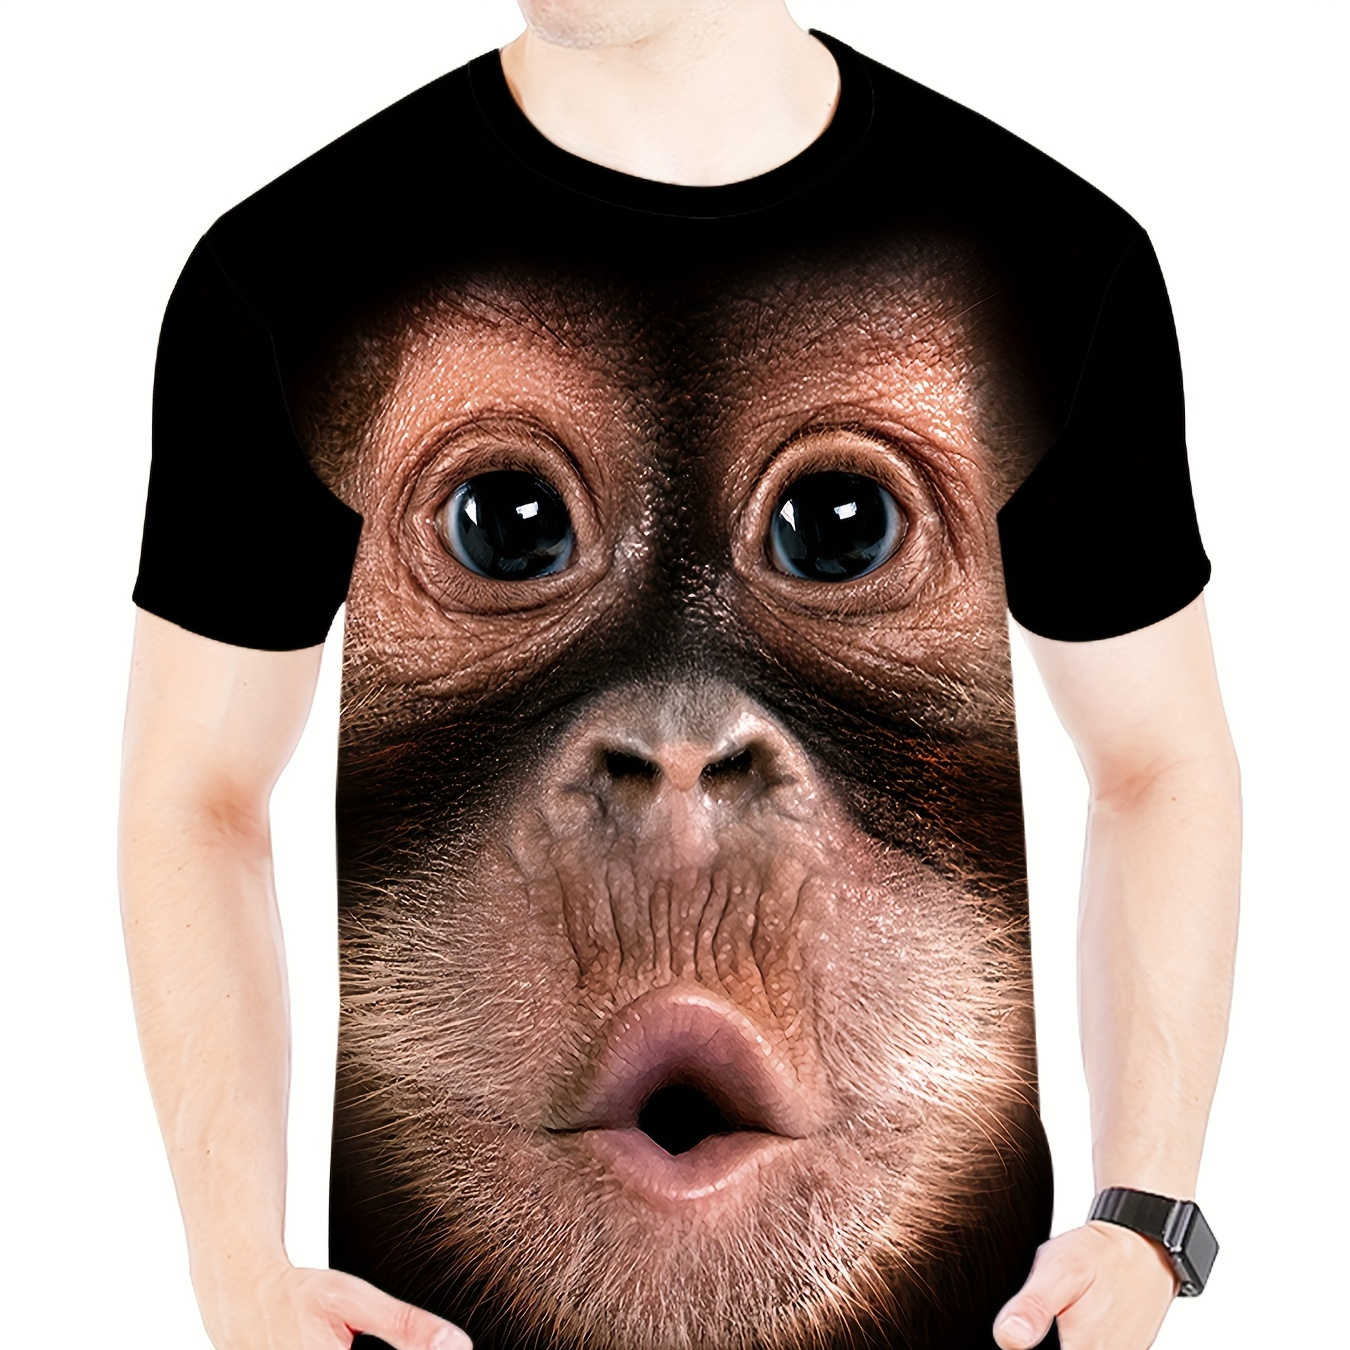 

Men's Novel And Funny 3d Digital Monkey Pattern T-shirt, Crew Neck And Short Sleeve Tops For Summer Outdoors Wear